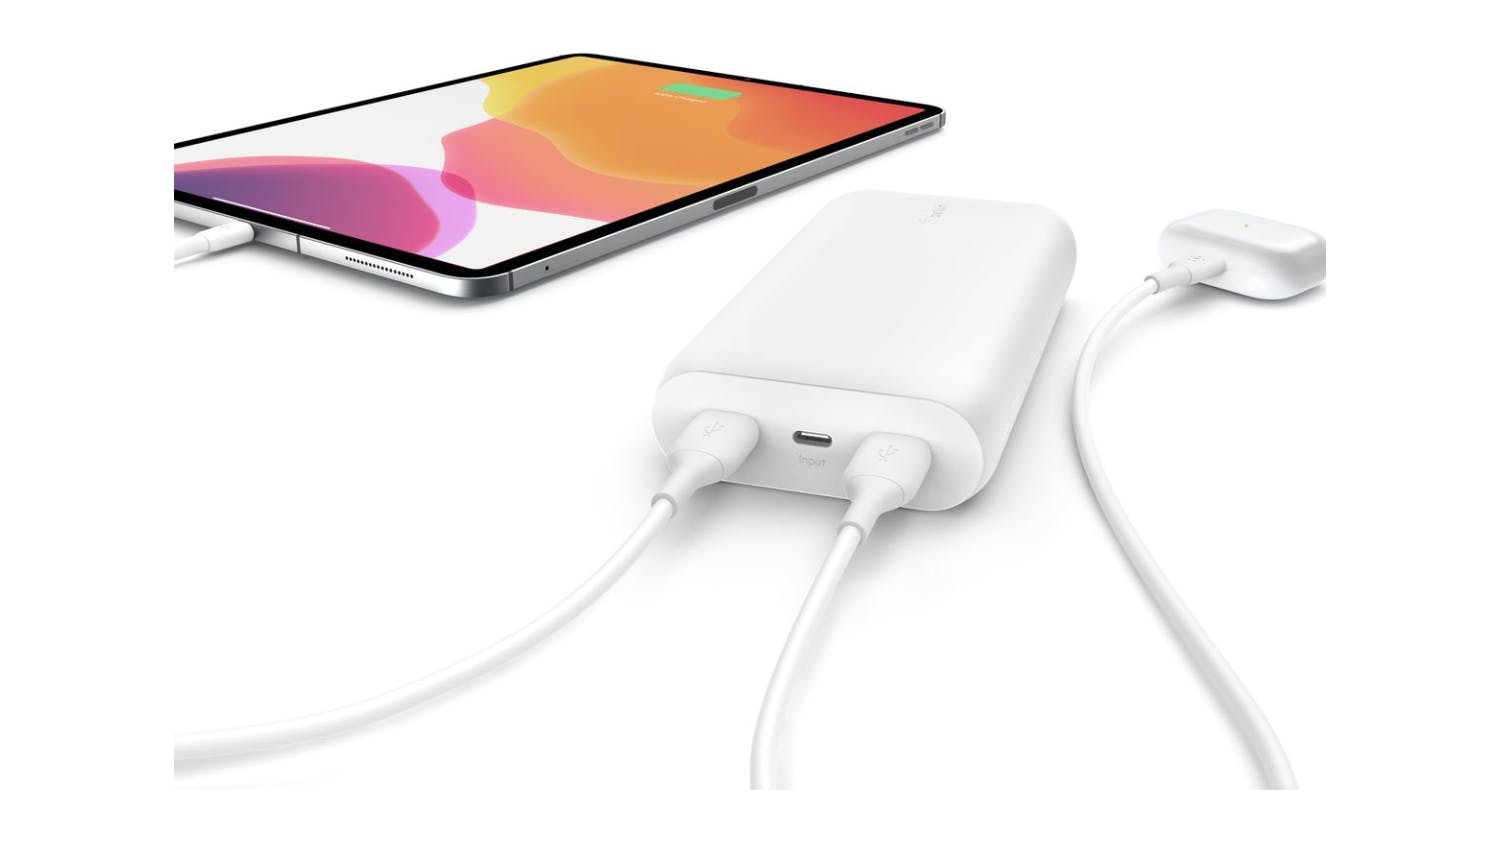 Belkin Boost Up Charge 20,000mAh Power Bank - White